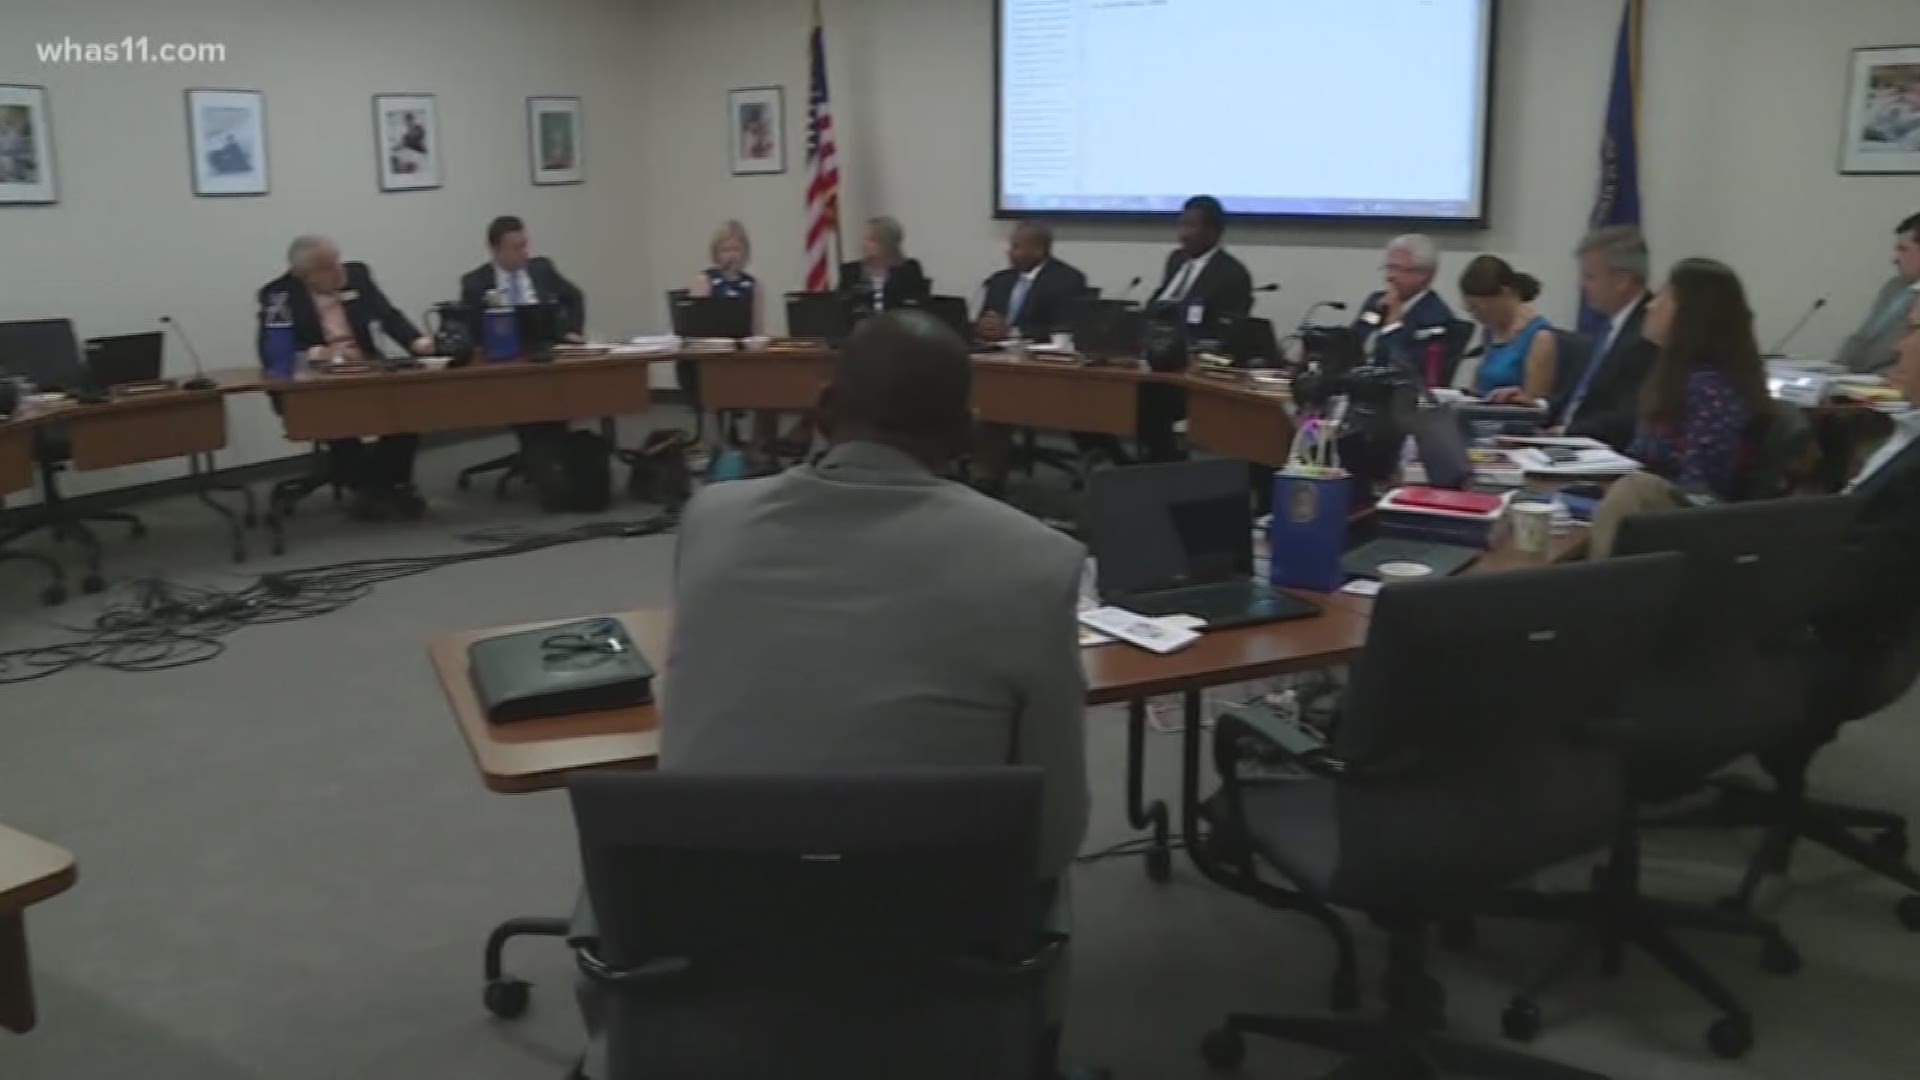 There's still no deal for JCPS board members on a possible compromise of state management of the district.